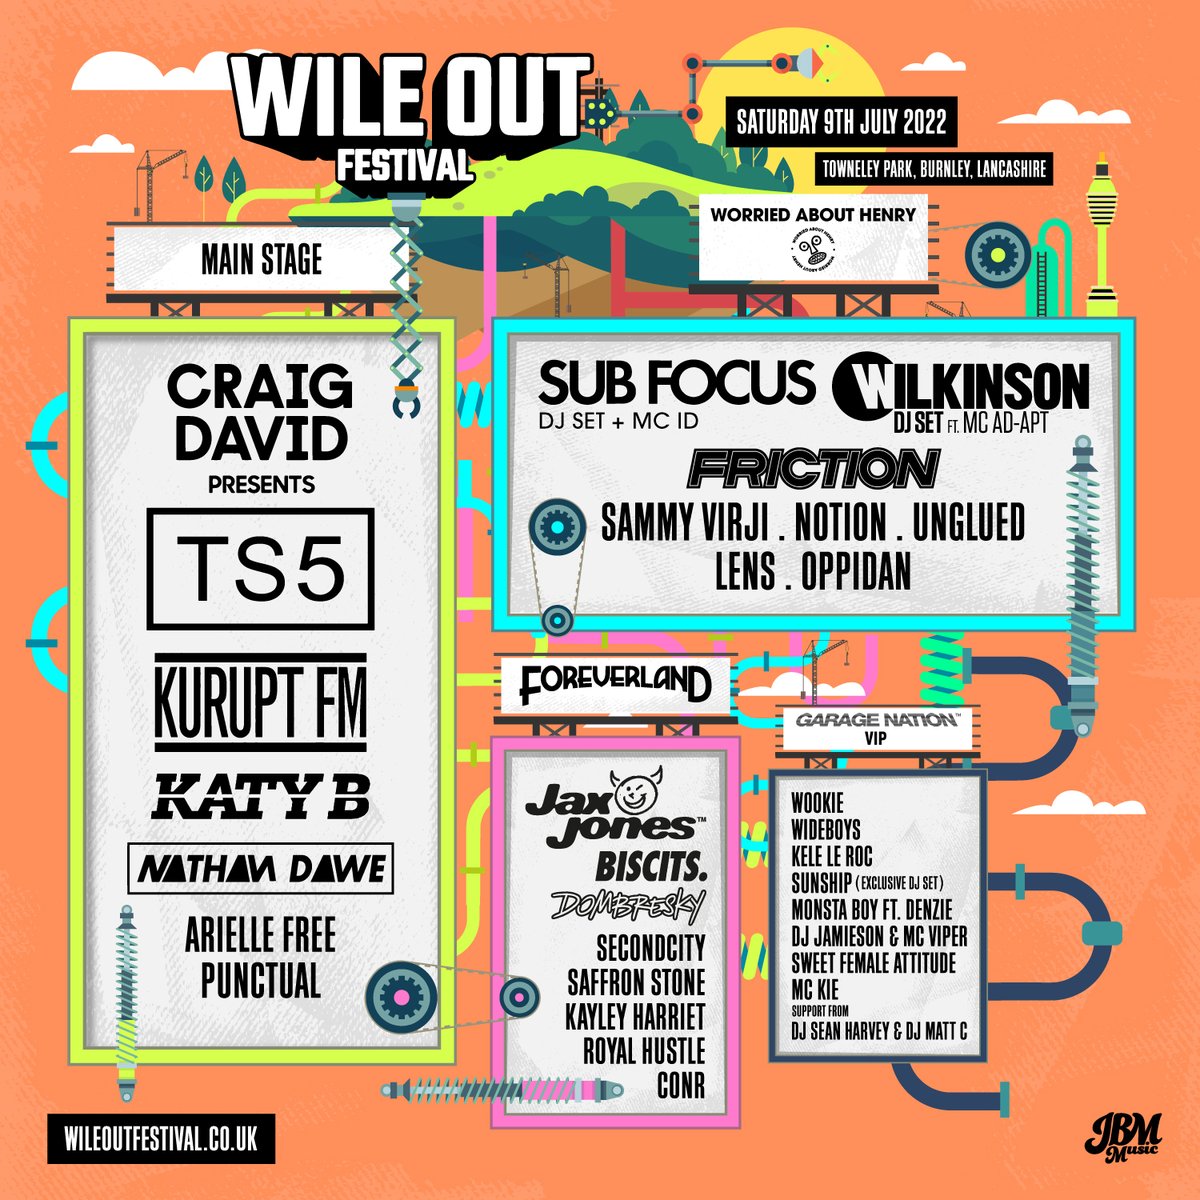 CATCH US DOWN AT WILE OUT FESTIVAL 9TH JULY!!! LINE UP LOOKING NAWTY 🔥🔥🔥🔥🔥 wileoutfestival.co.uk